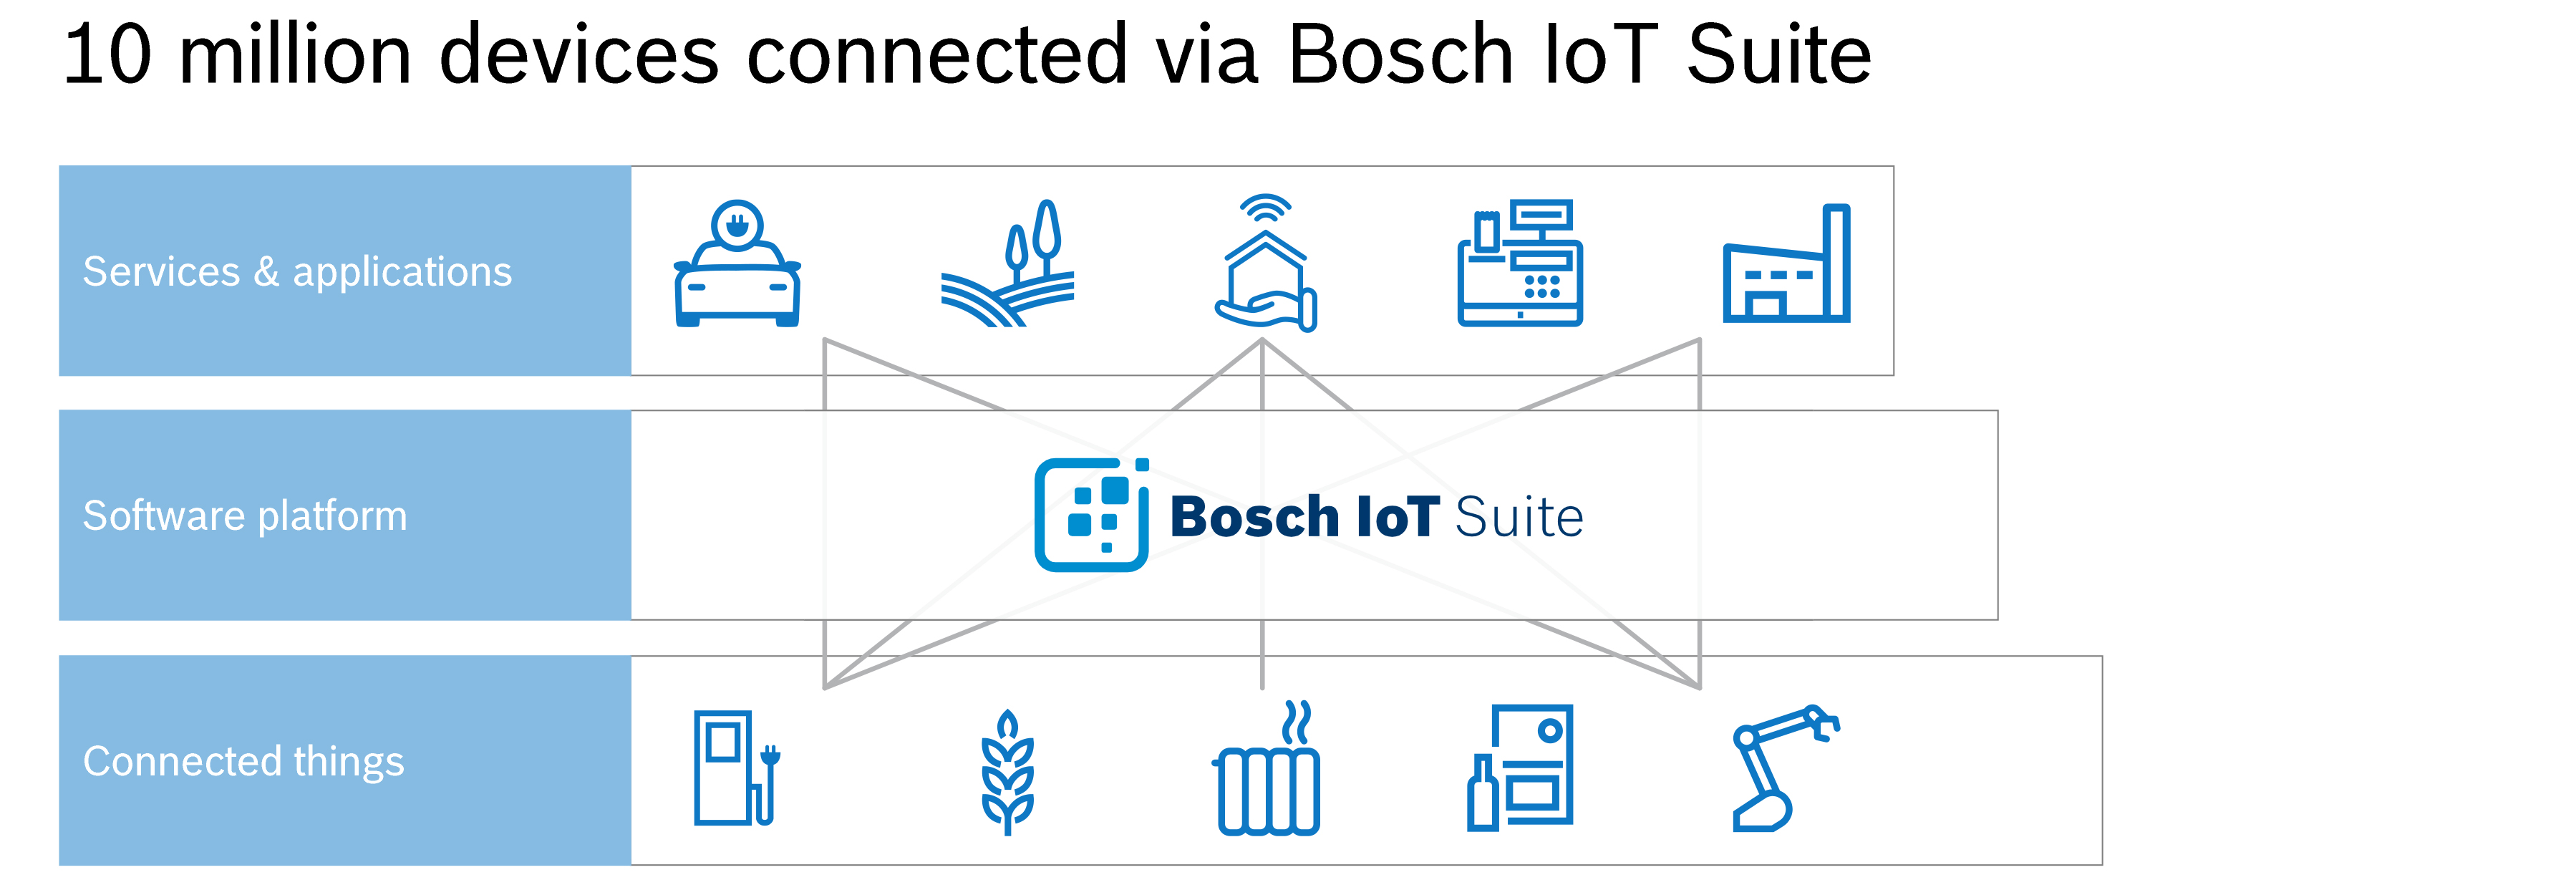 Bosch IoT Suite reaches landmark number of connected devices – and still rising